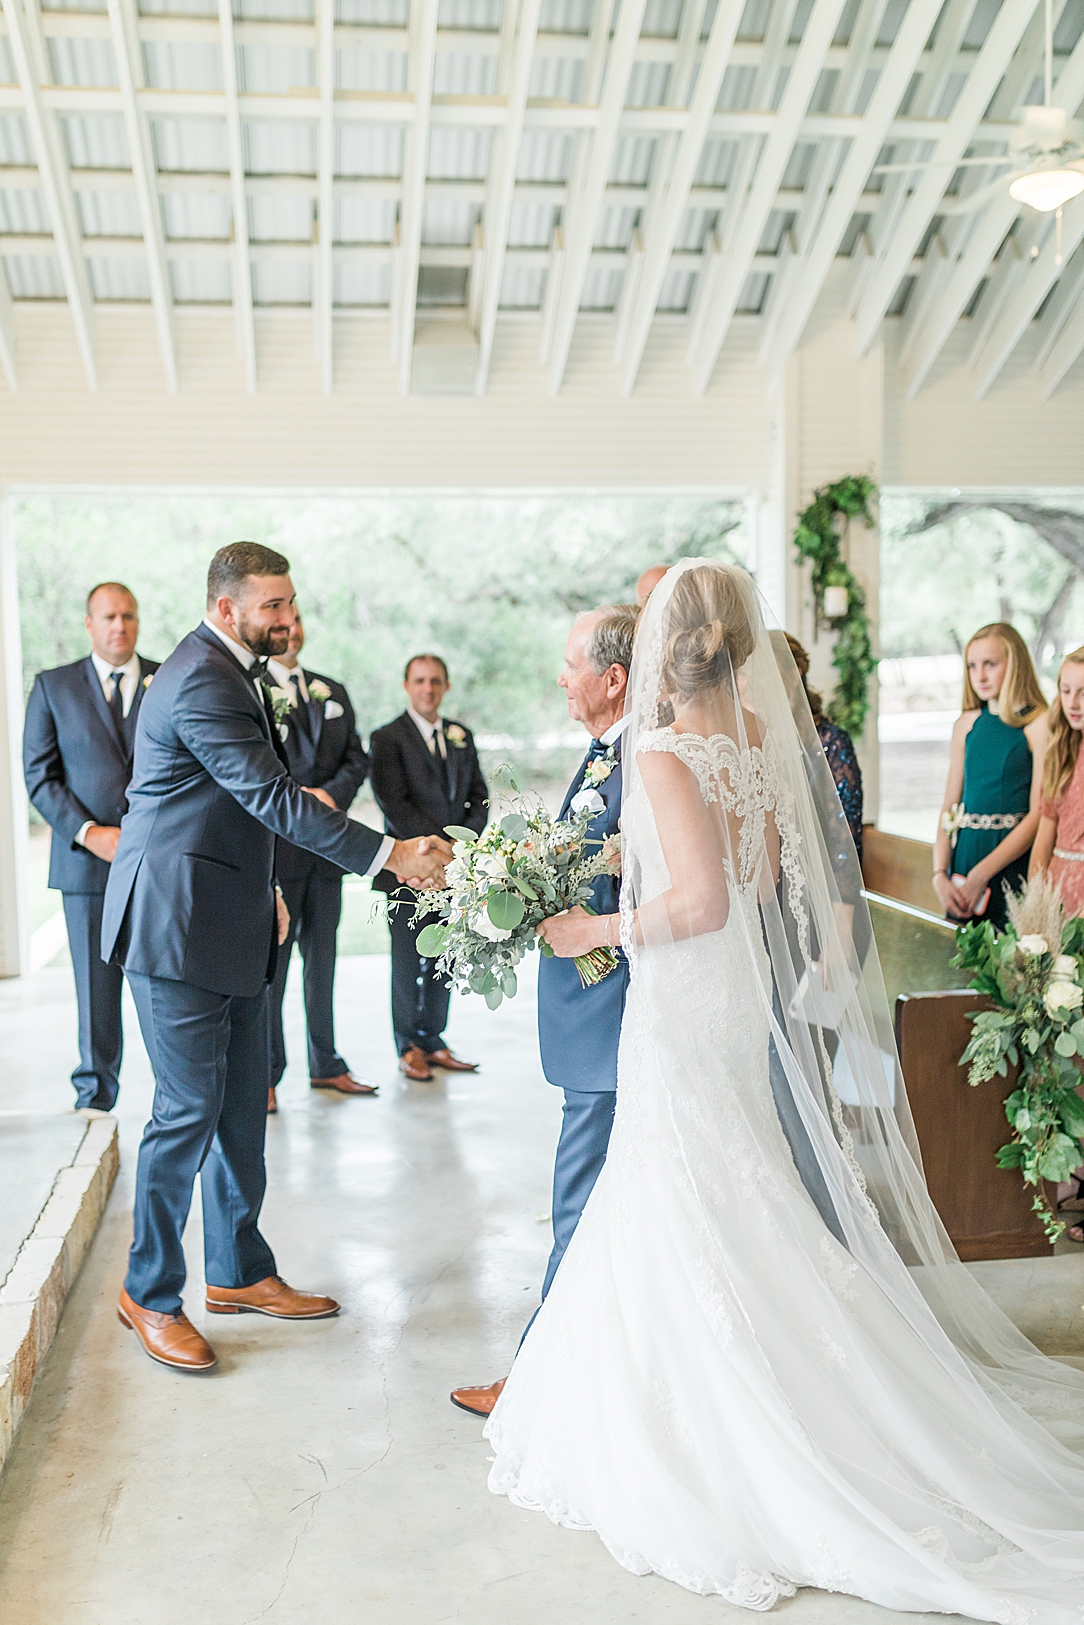 Fall Wedding at The Chandelier of Gruene in New Braunfels Texas by Allison Jeffers Photography 0050